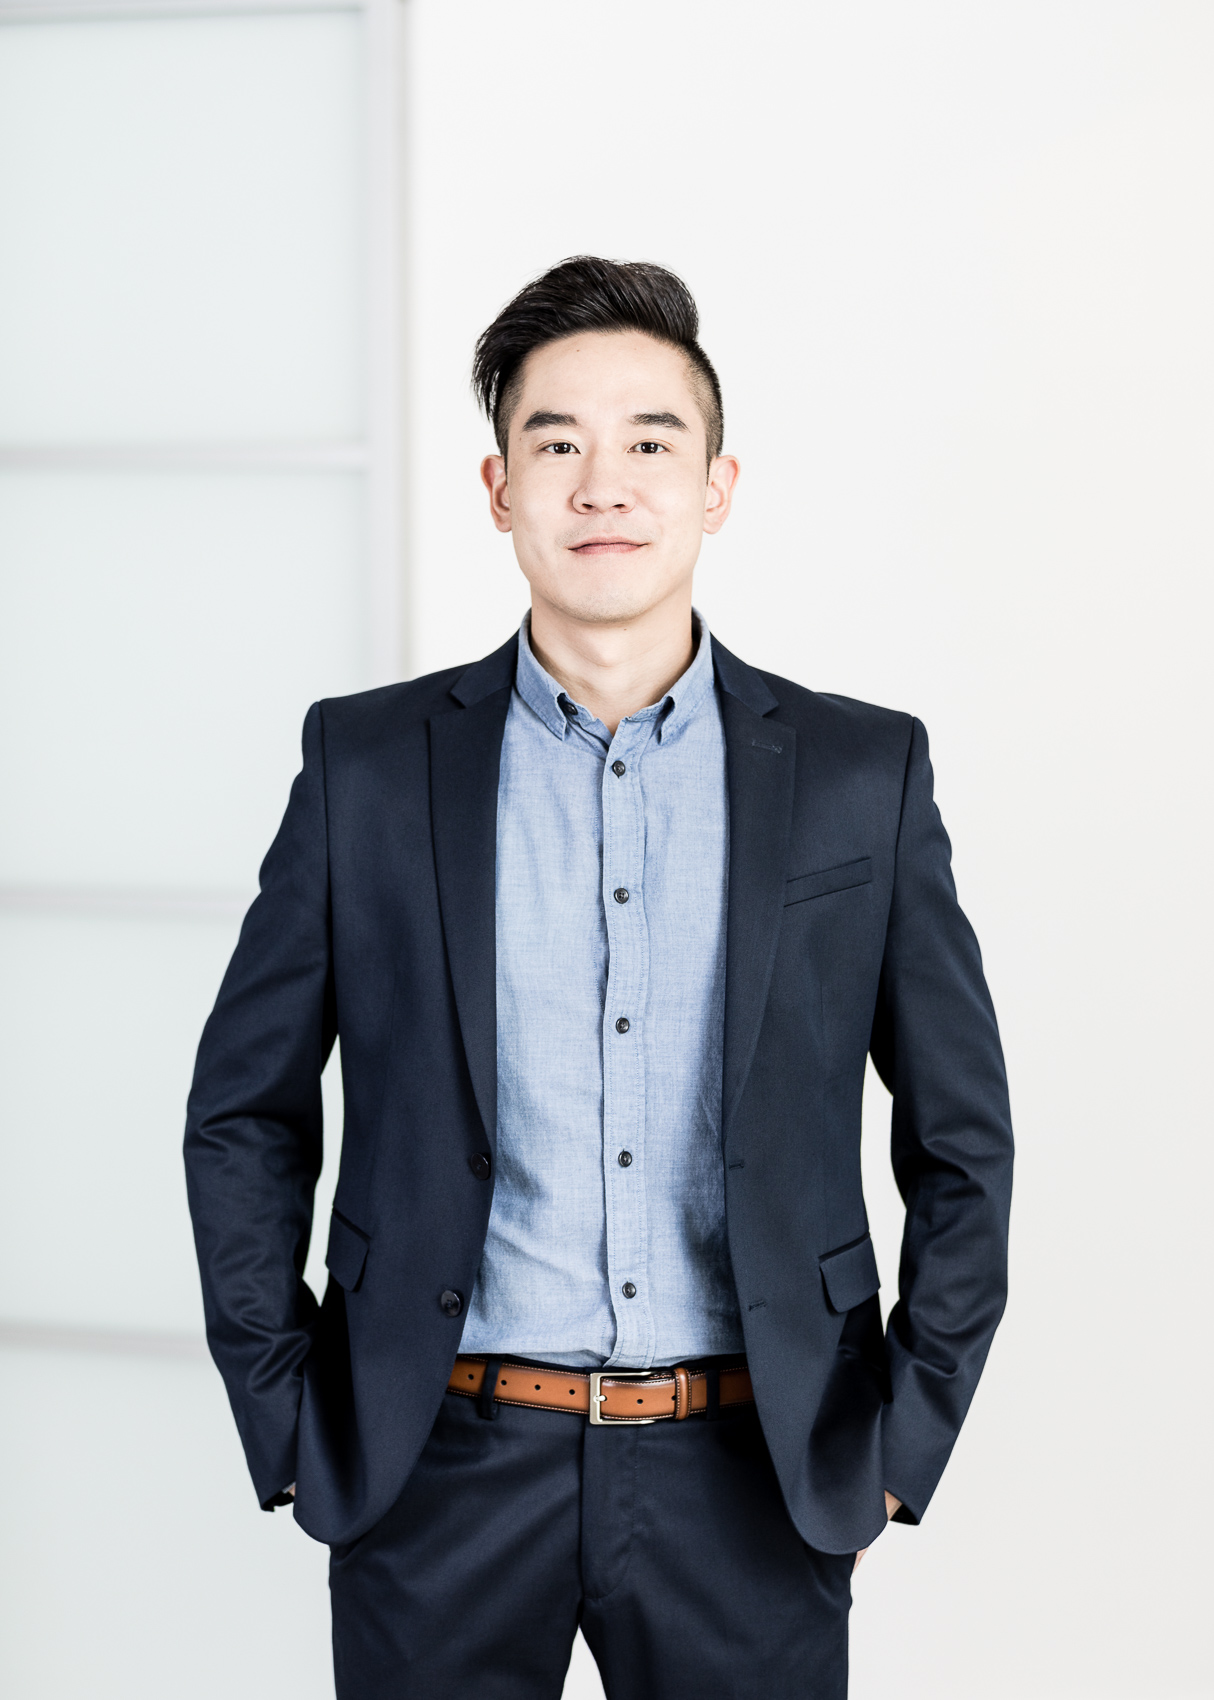 Vincent Chee, Executive Assistant to the CEO at Bevel PR | PATRICK STRATTNER PHOTOGRAPHY